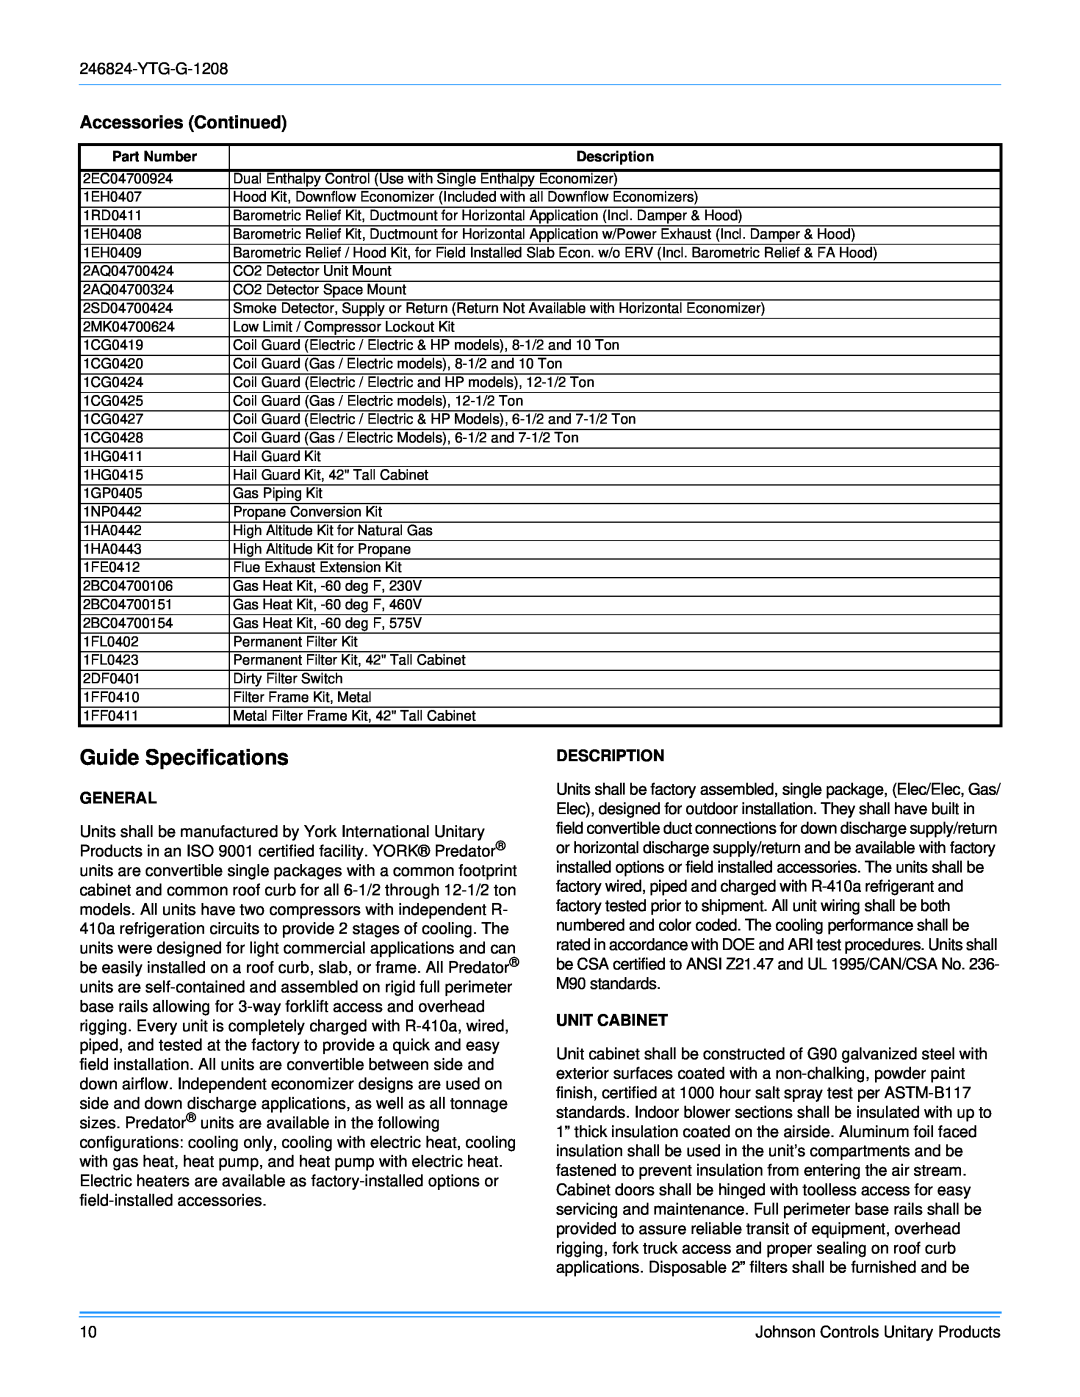 York R-410A manual Guide Specifications, Accessories Continued 